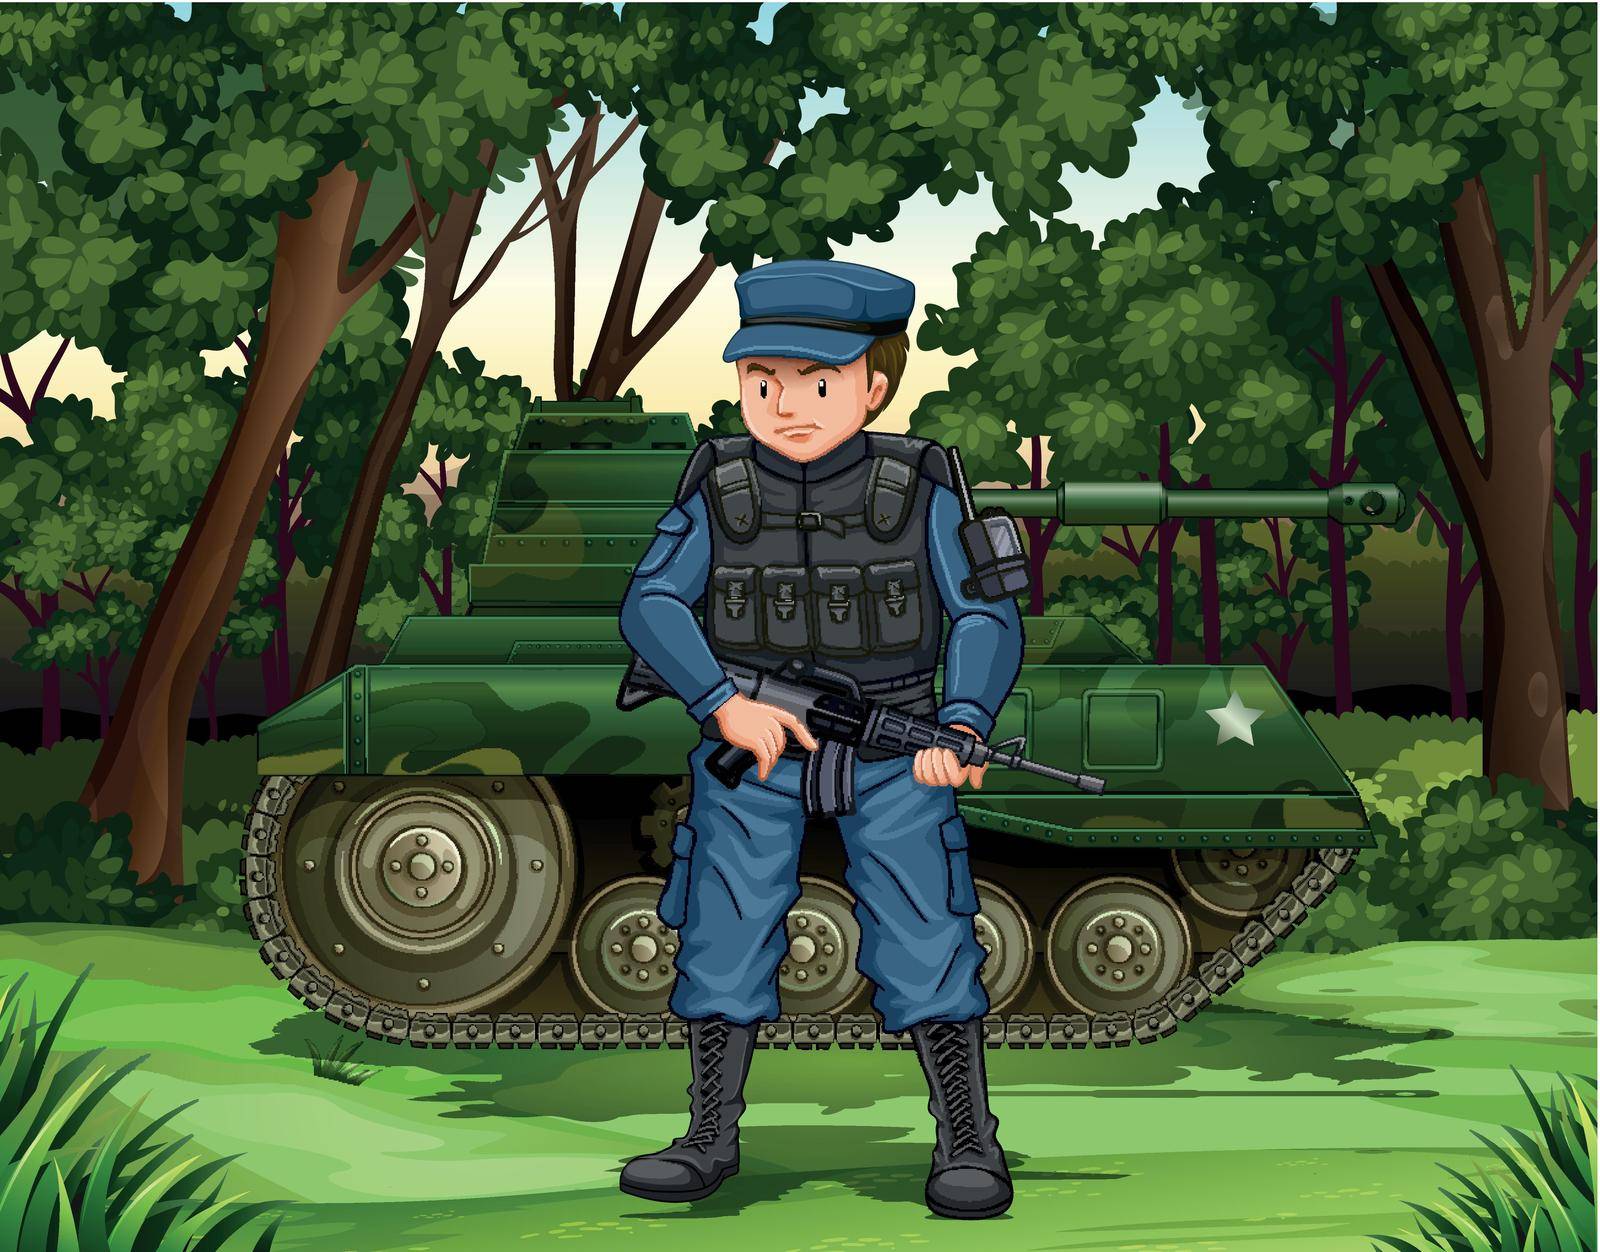 Soldier with gun by the tank illustration